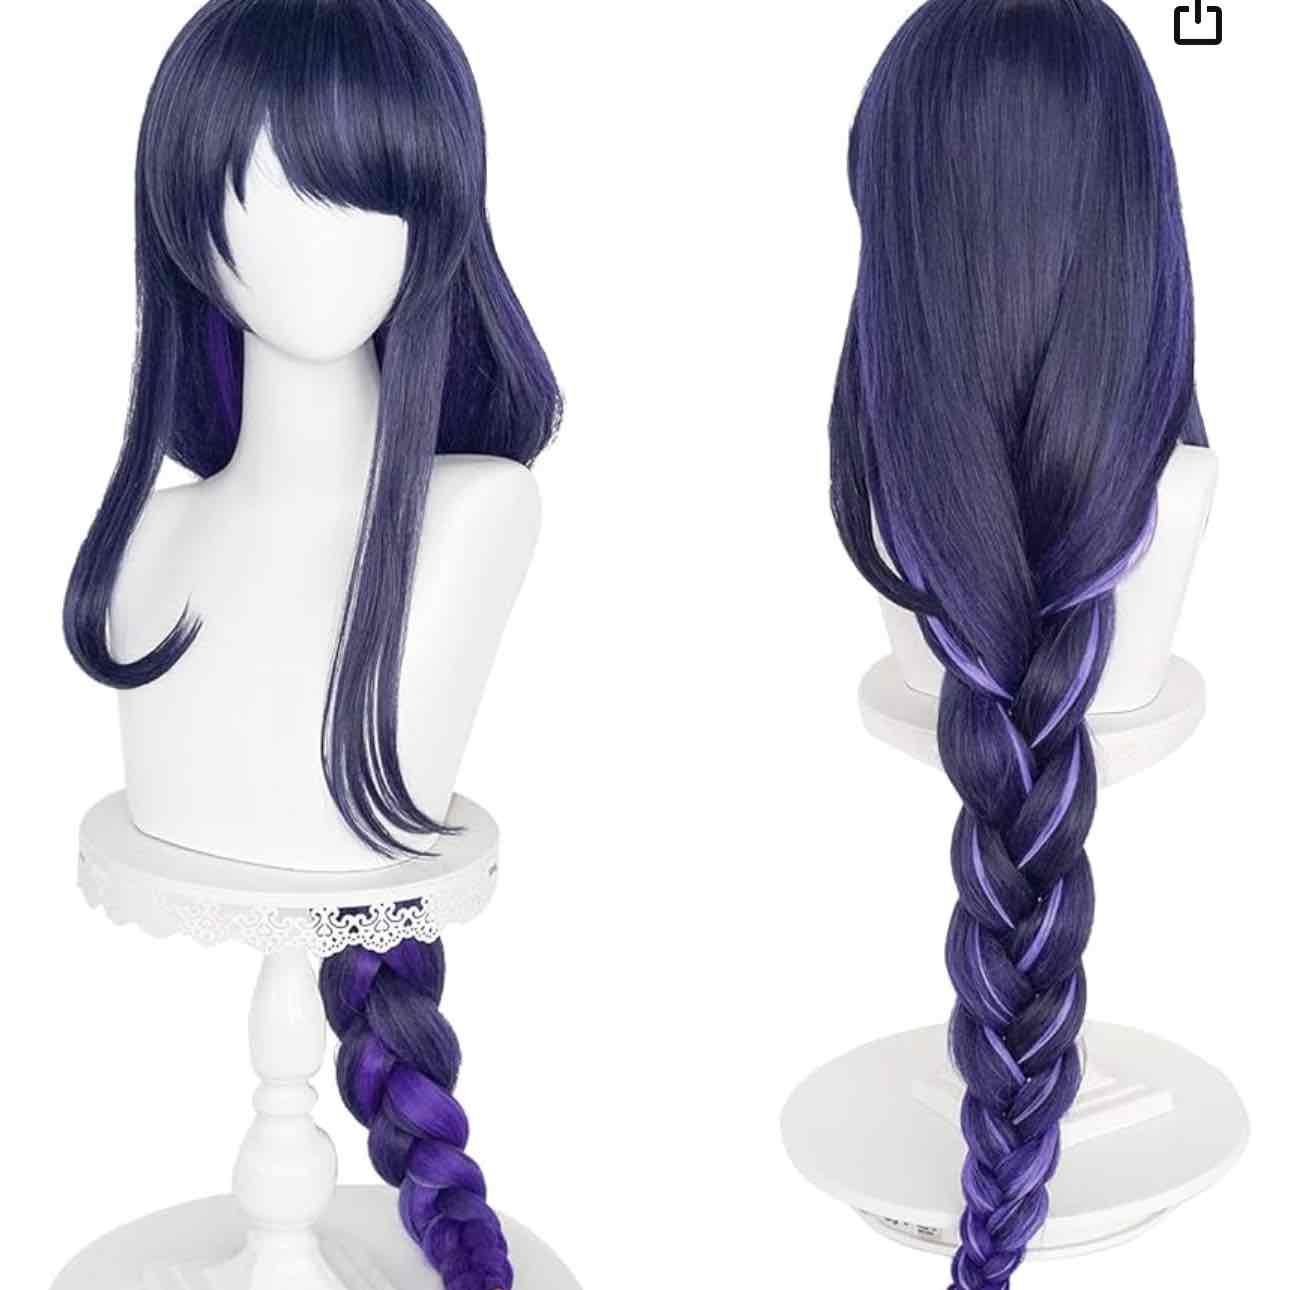 SL Purple Pigtails Wig for Mona Cosplay Costume Anime Lavender Straight Hair Wigs with Separated Pigtails + Cap